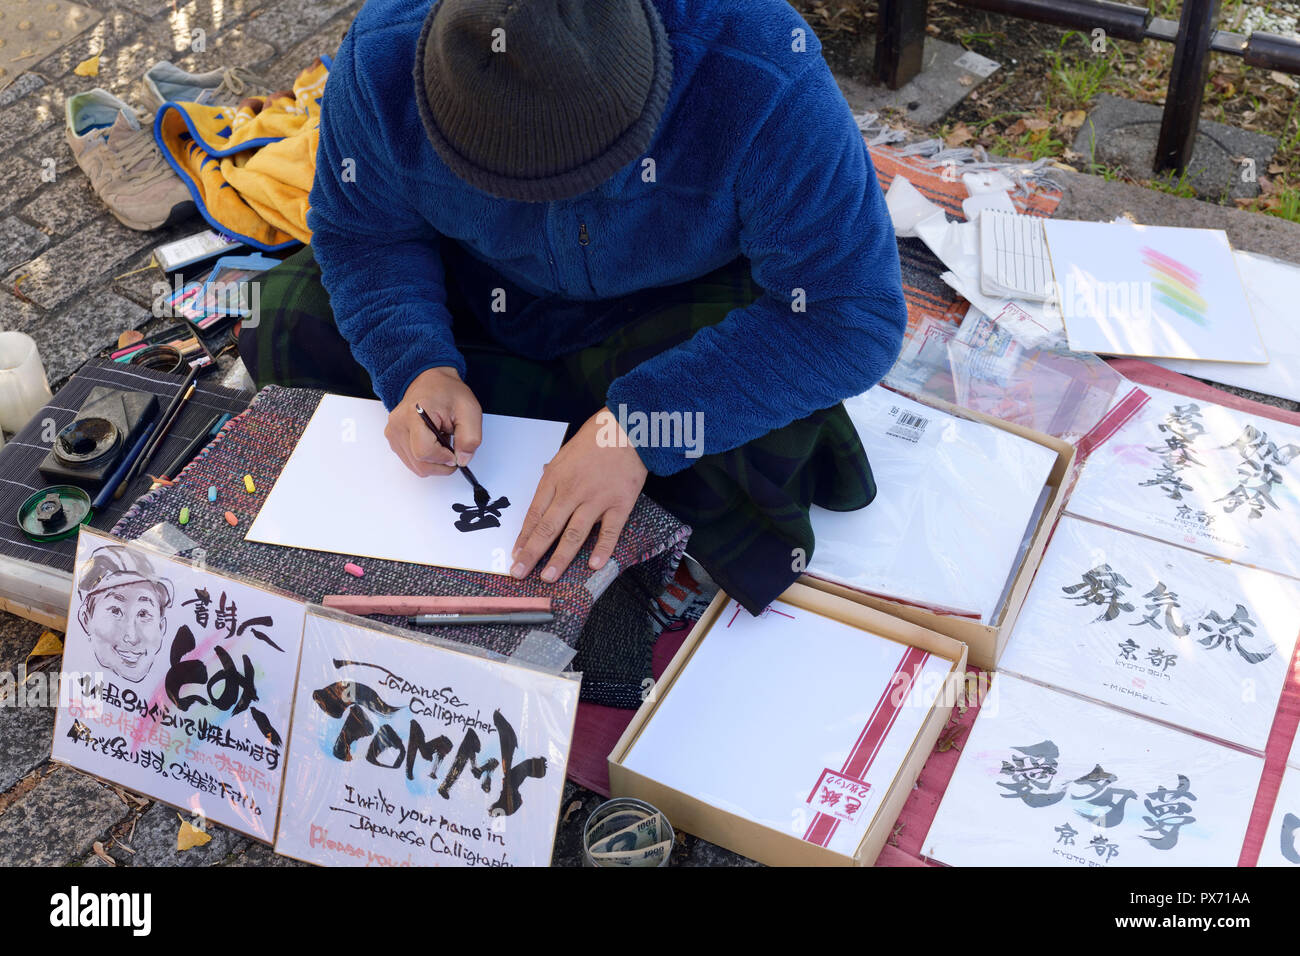 License available at MaximImages.com - Japanese street artist calligrapher writing people names in Kanji characters, Kyoto, Japan Stock Photo